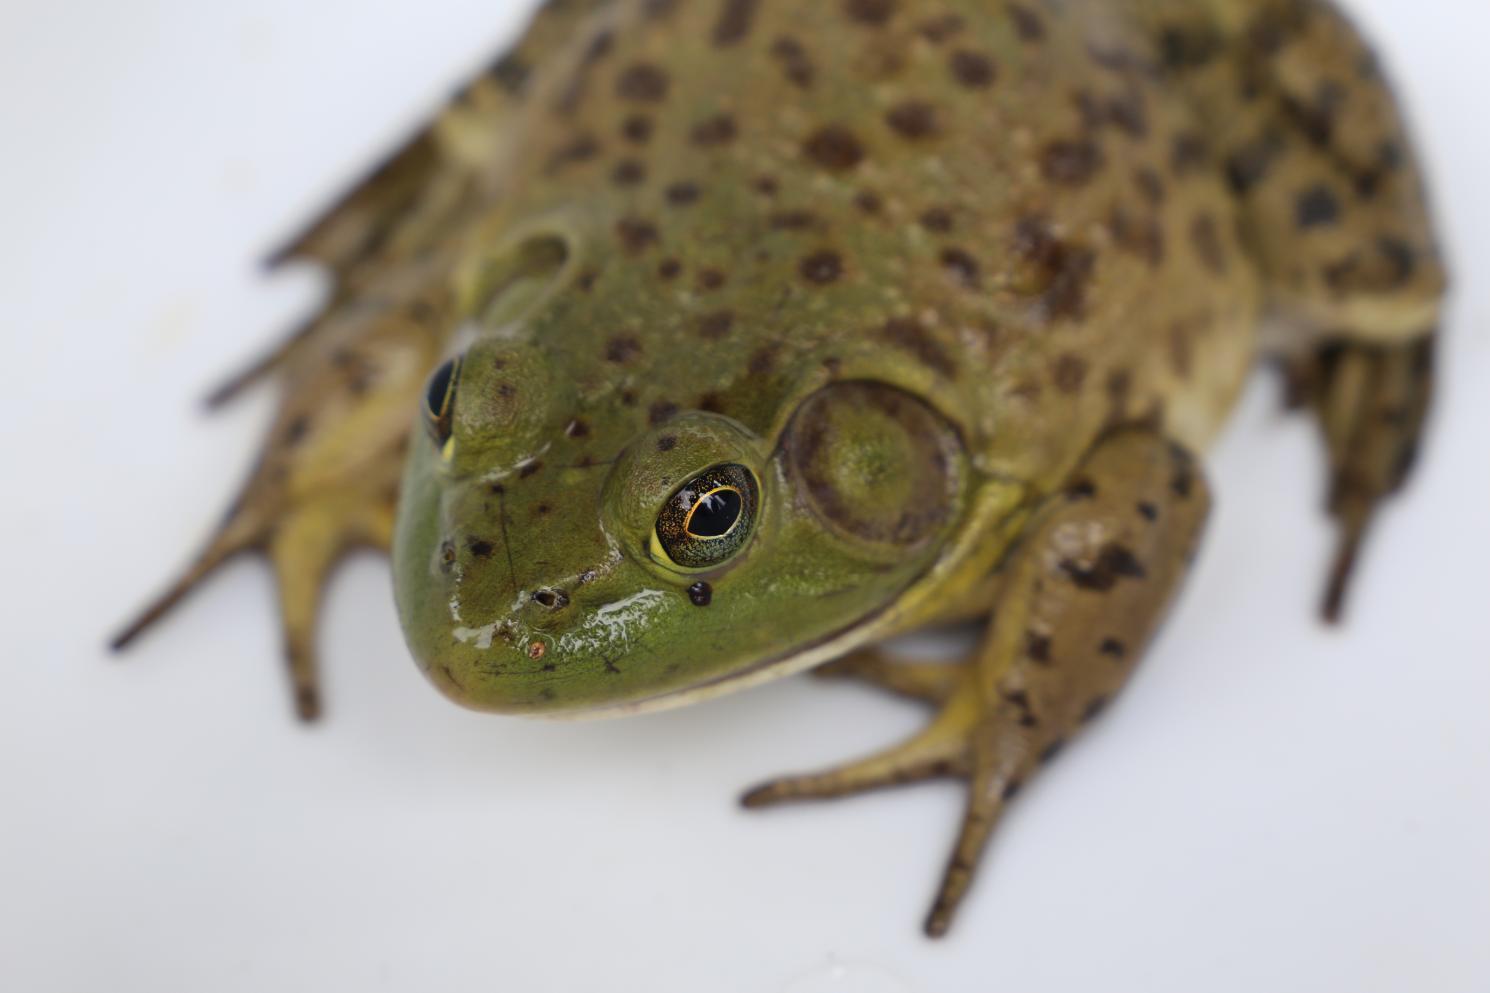 A bullfrog from the top